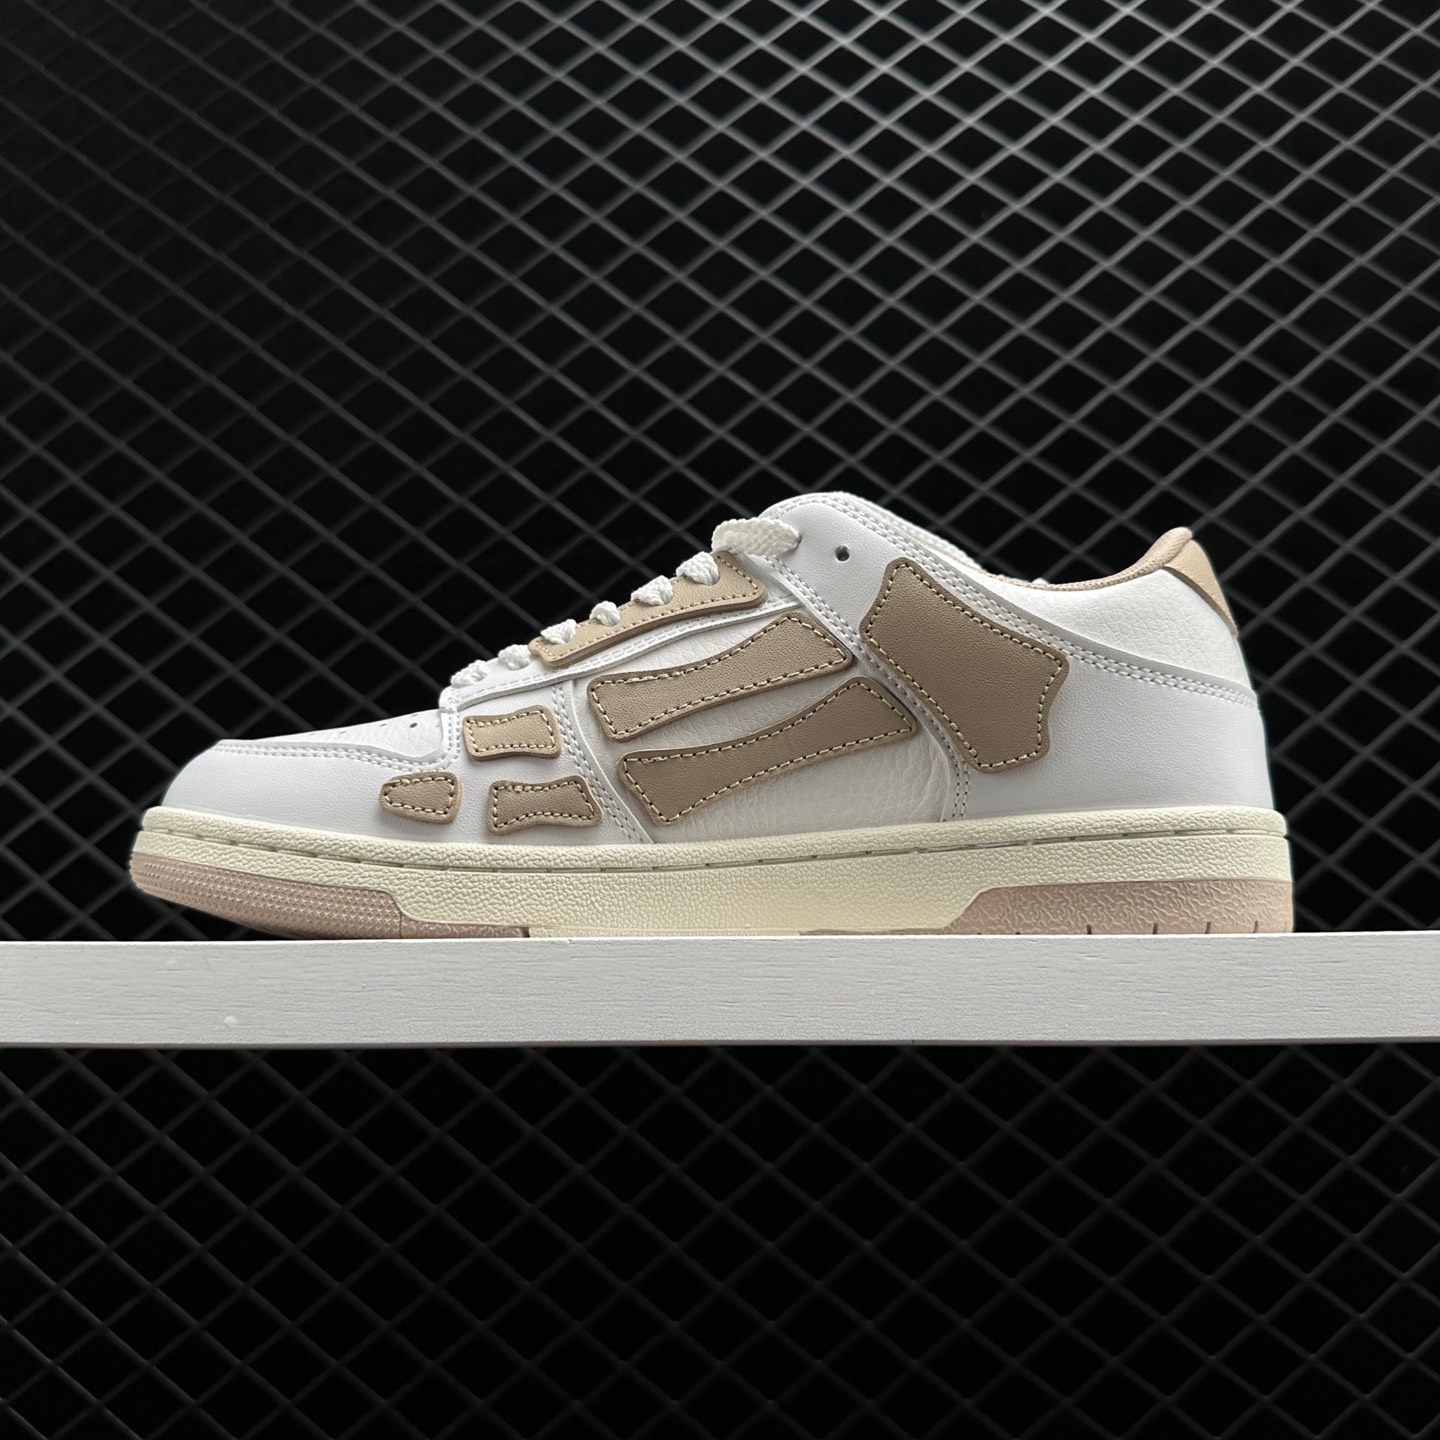 Amiri Skel Top Low - White/Beige: Premium Sneakers for Style Enthusiasts